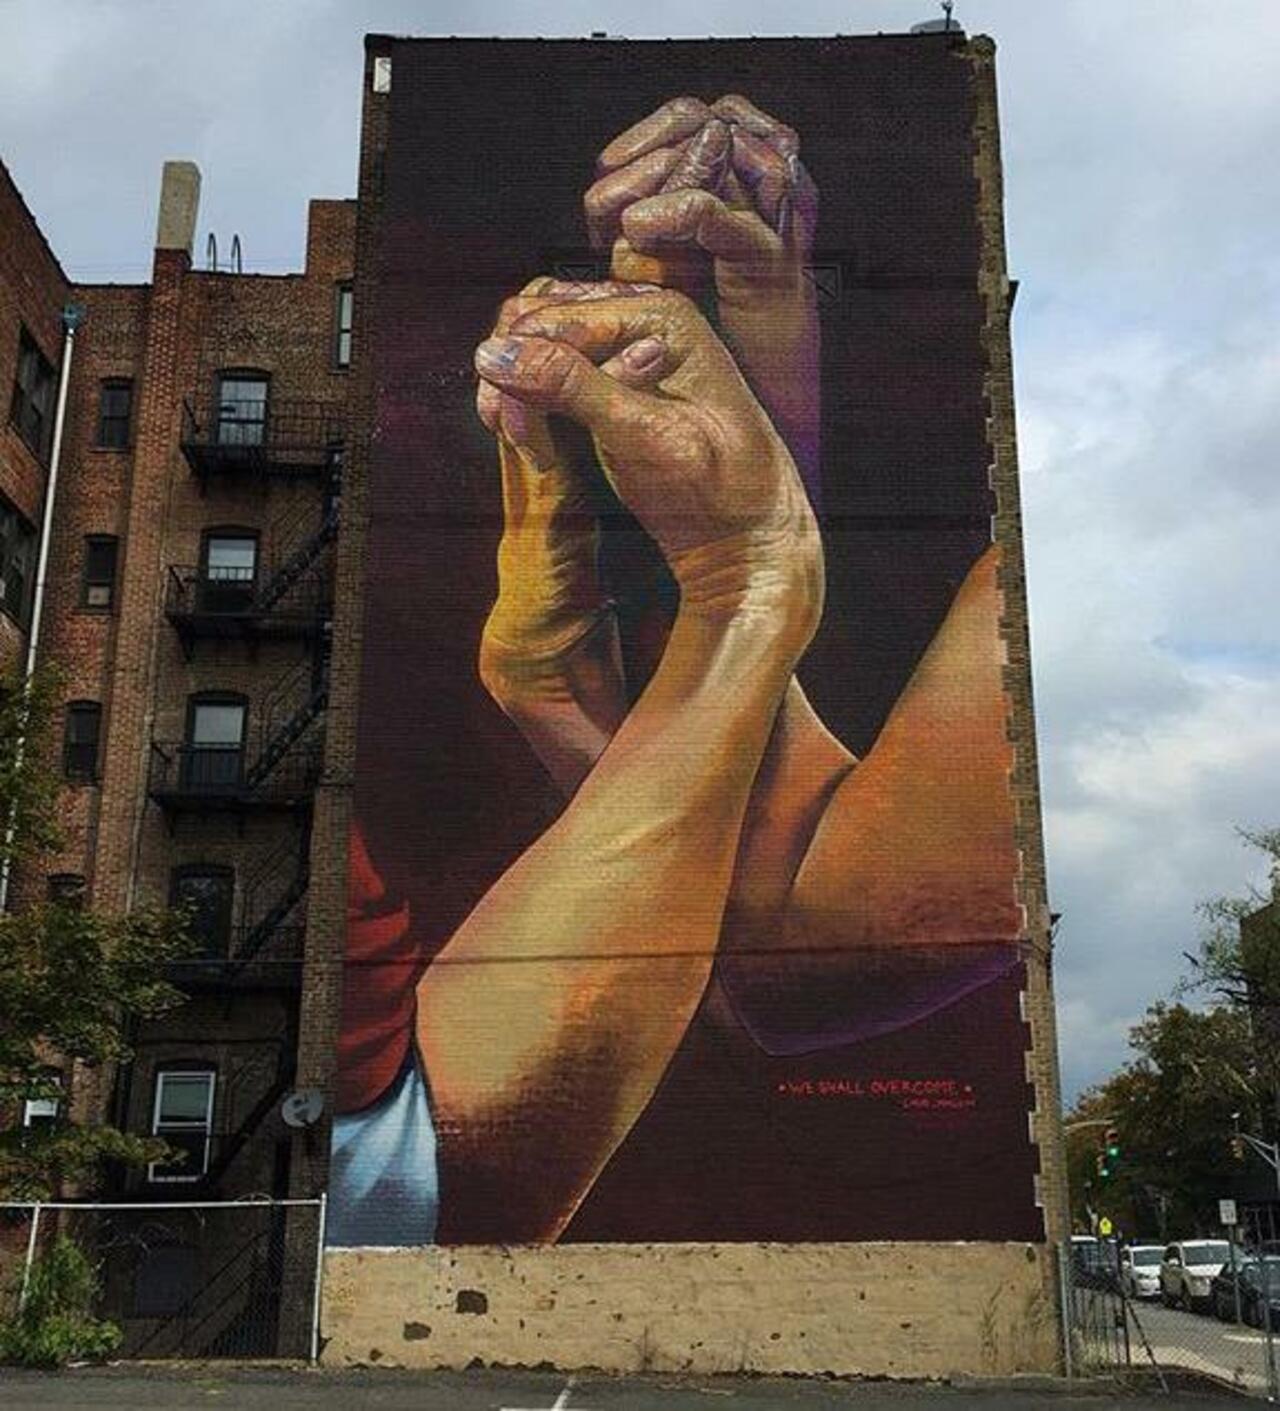 New Street Art by CaseMaclaim in Jersey City for the TheBKcollective 

#art #graffiti #mural #streetart http://t.co/hAF1cC2VyW